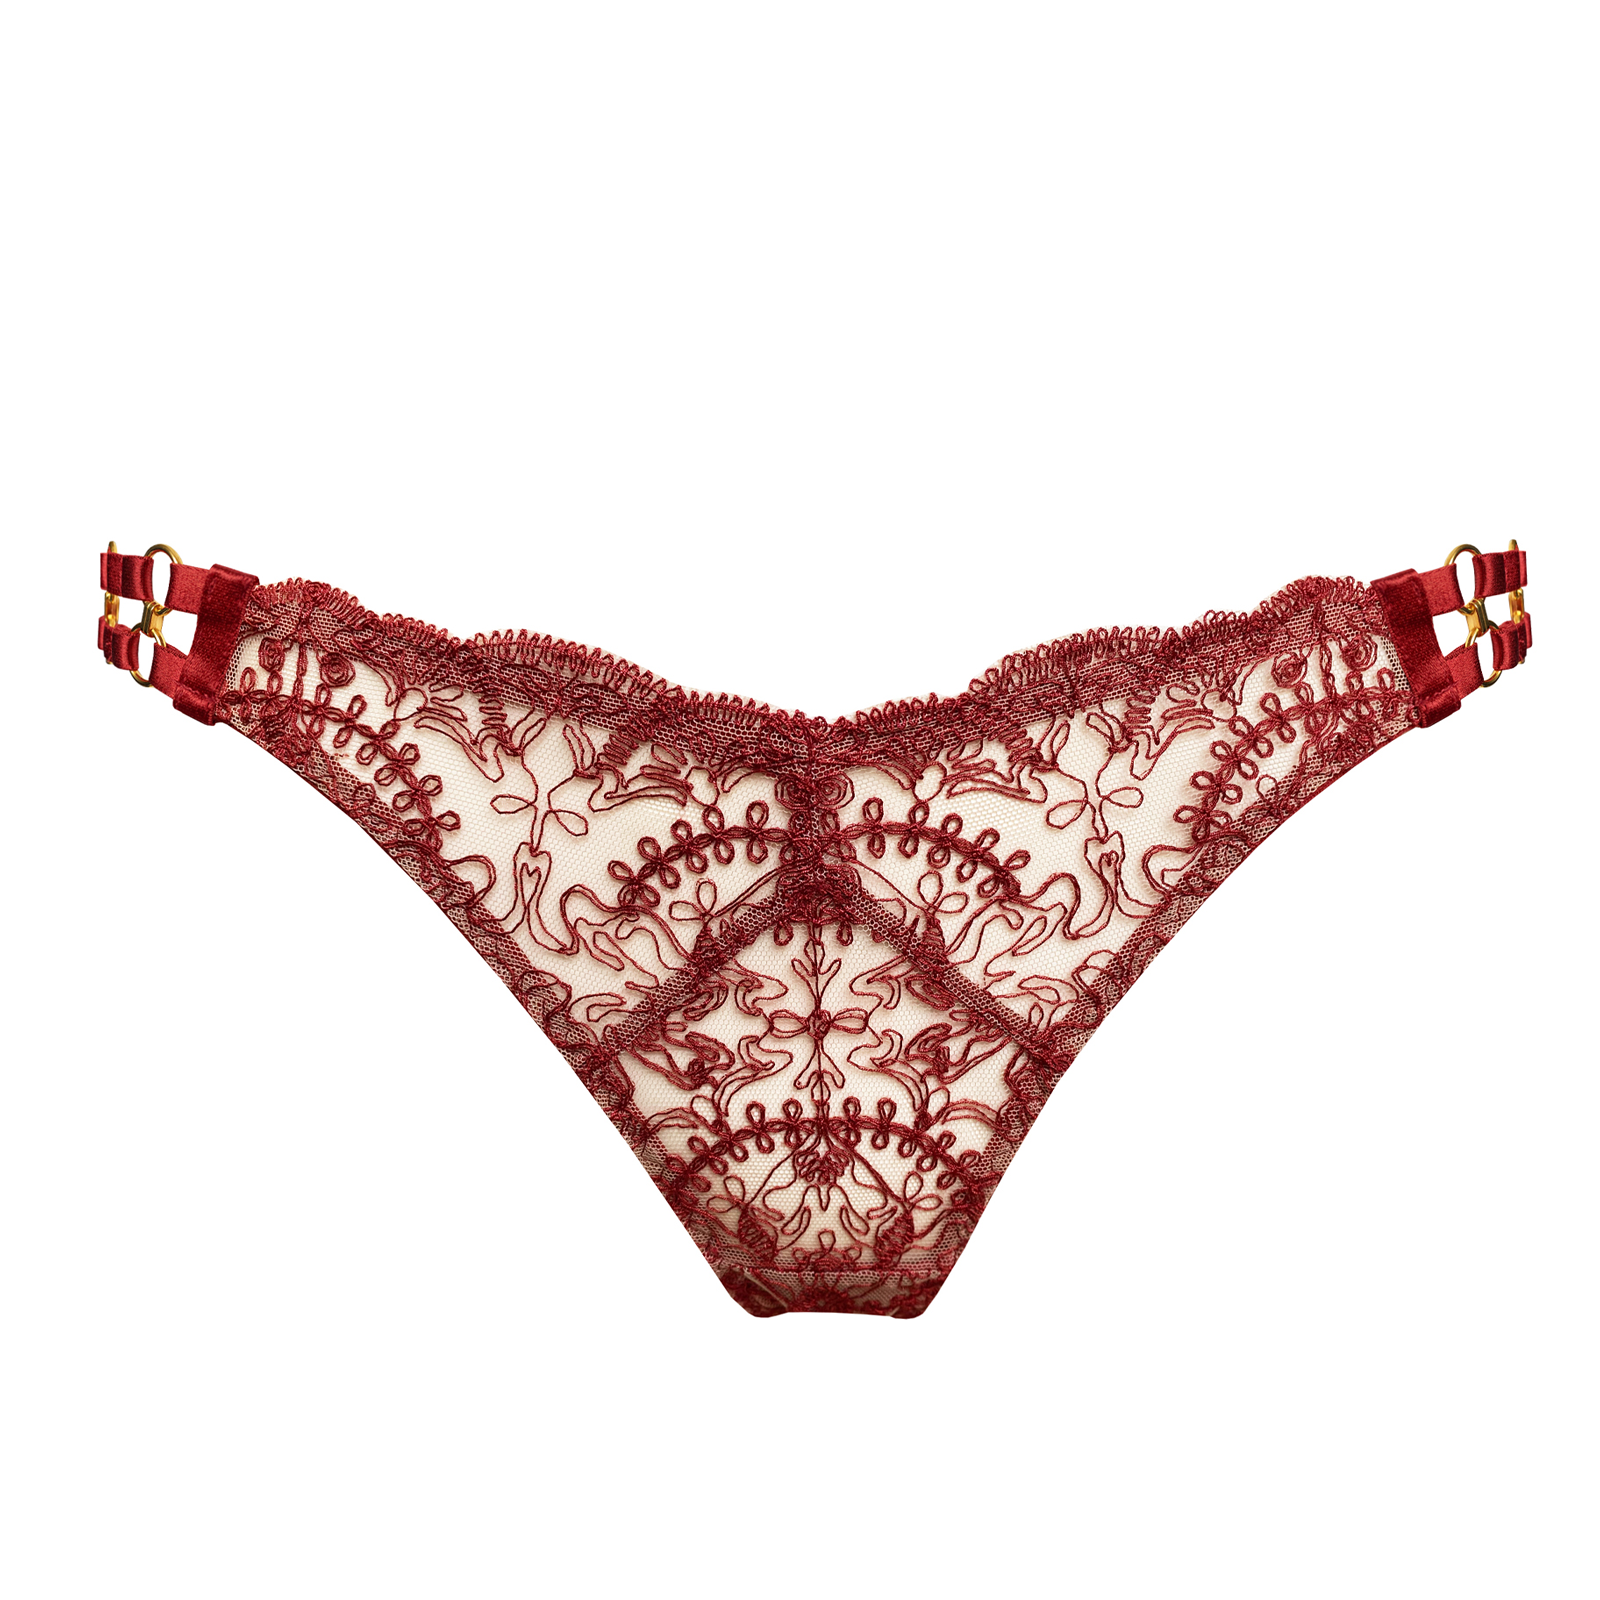 Cymatic open back brief by Bordelle - red